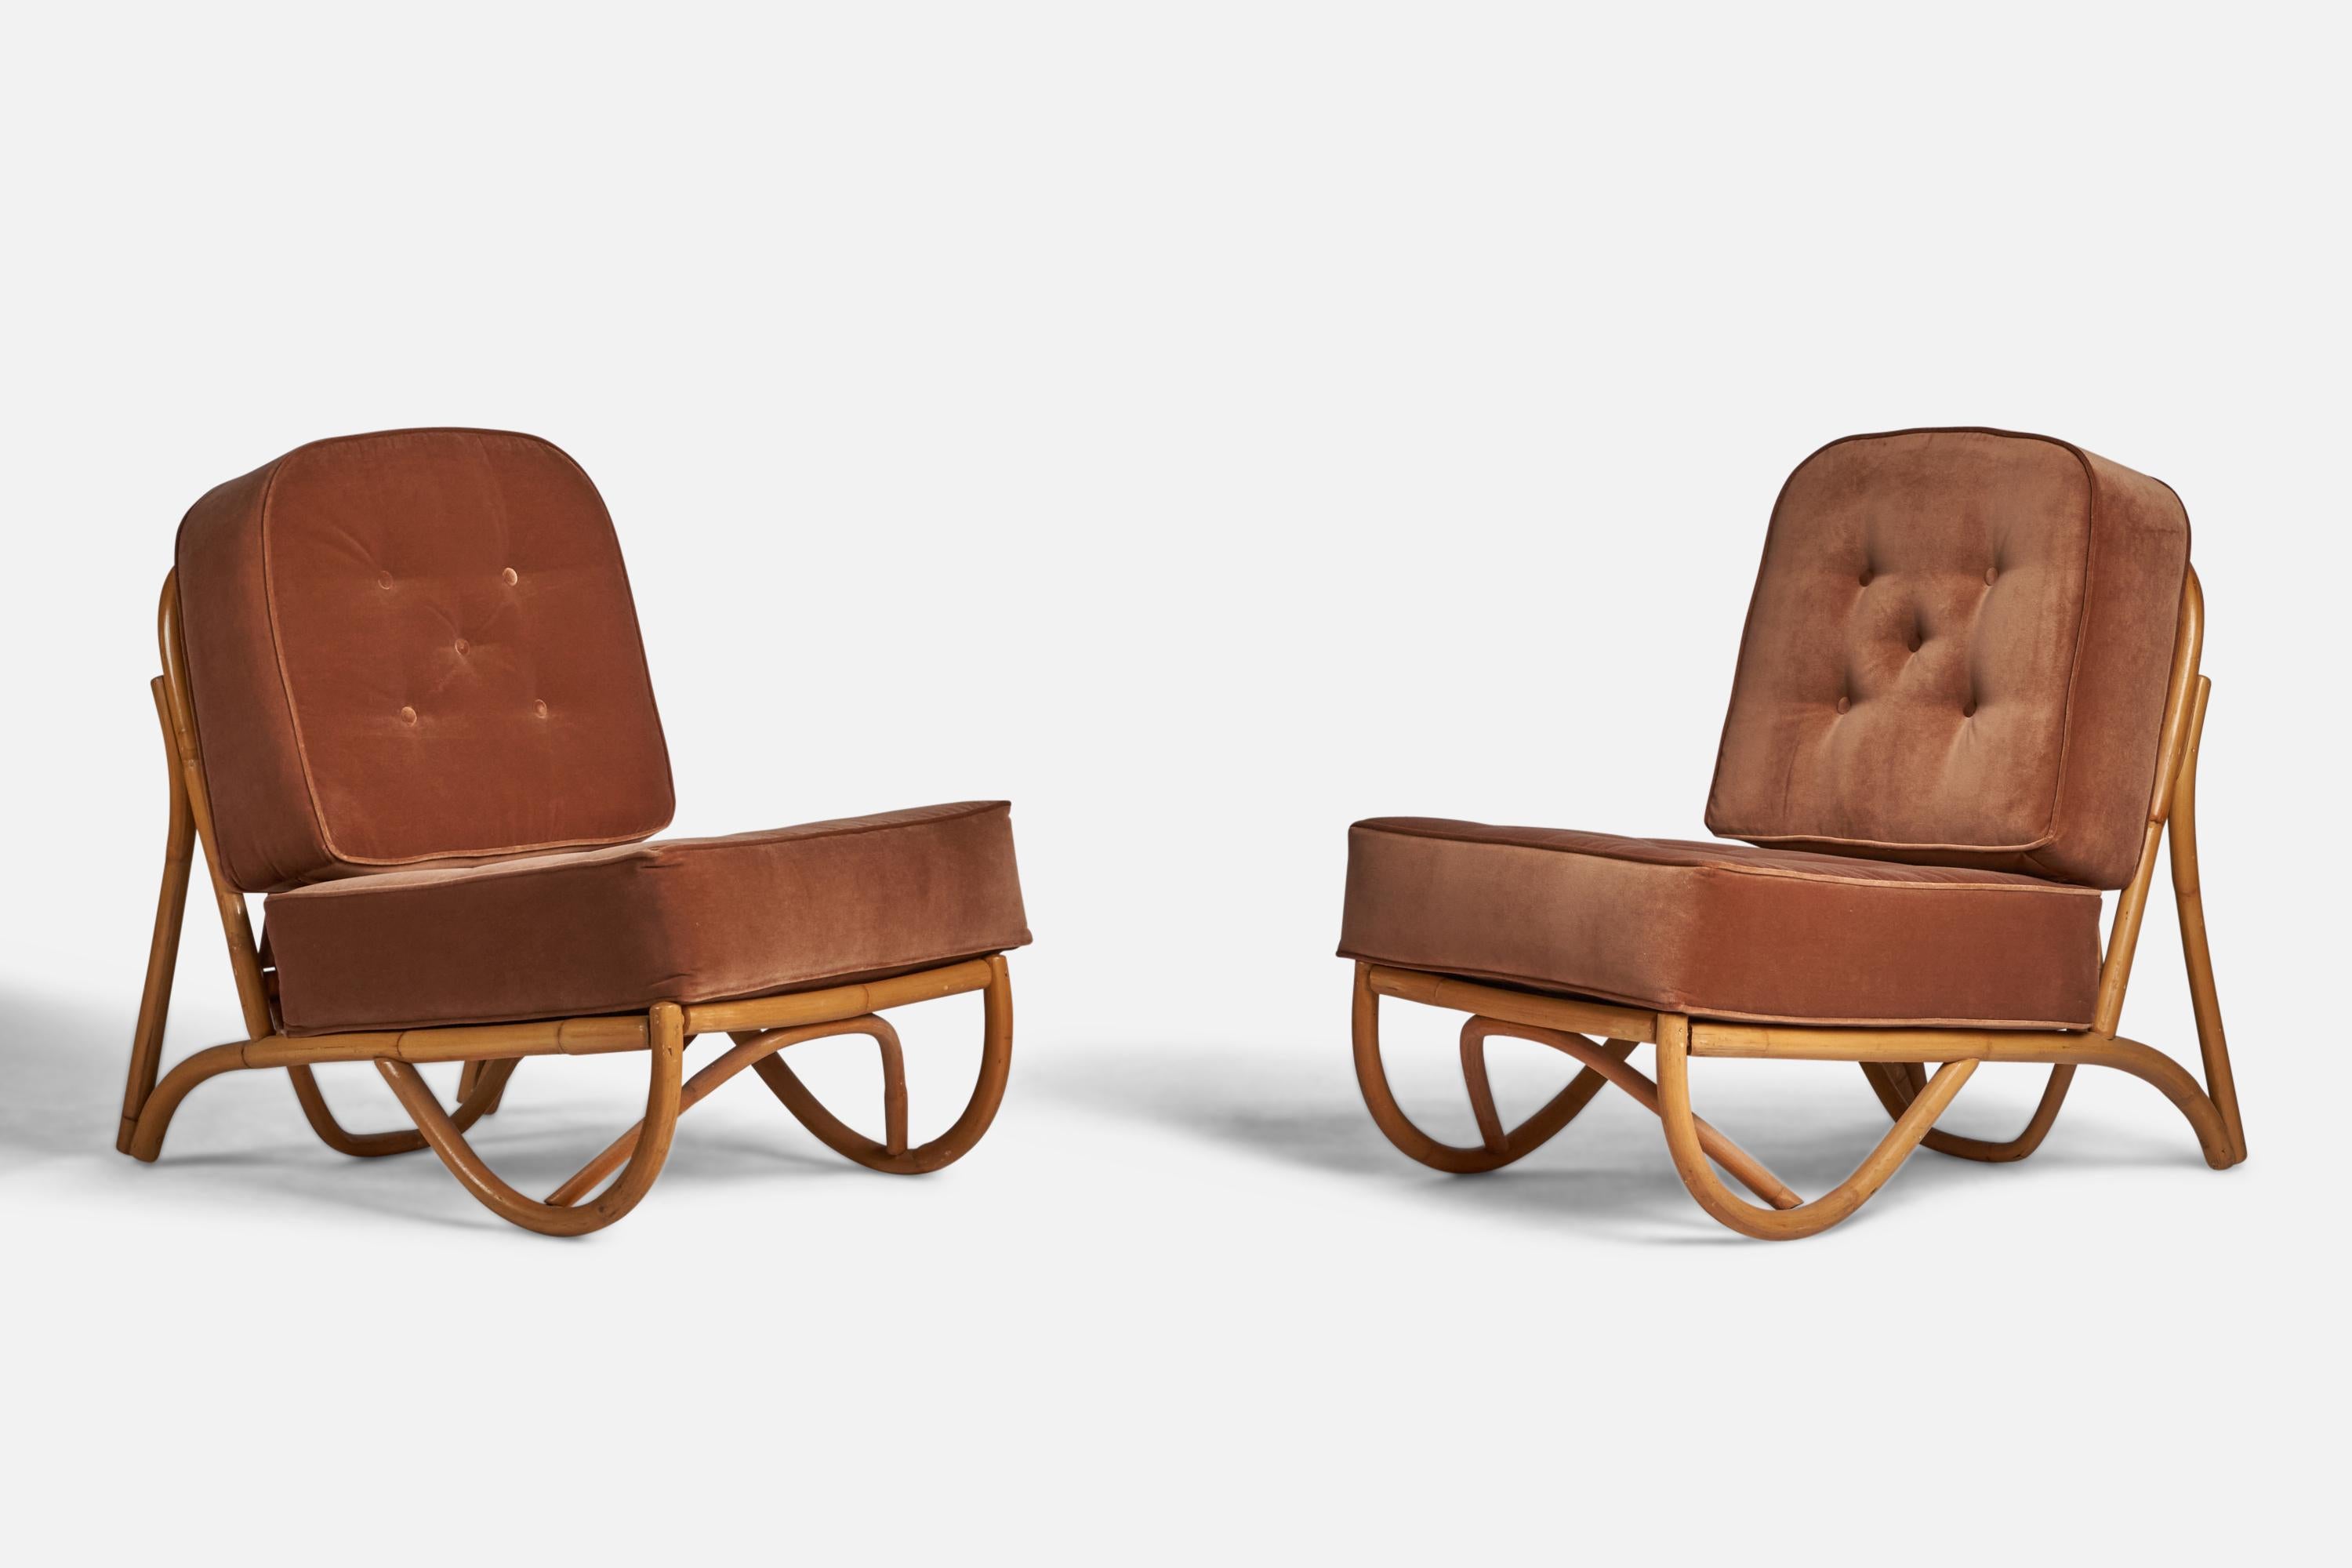 A pair of bamboo and brown red velvet slipper lounge chairs designed and produced by Ficks Reed, USA, 1940s.
Seat height: 17.3”